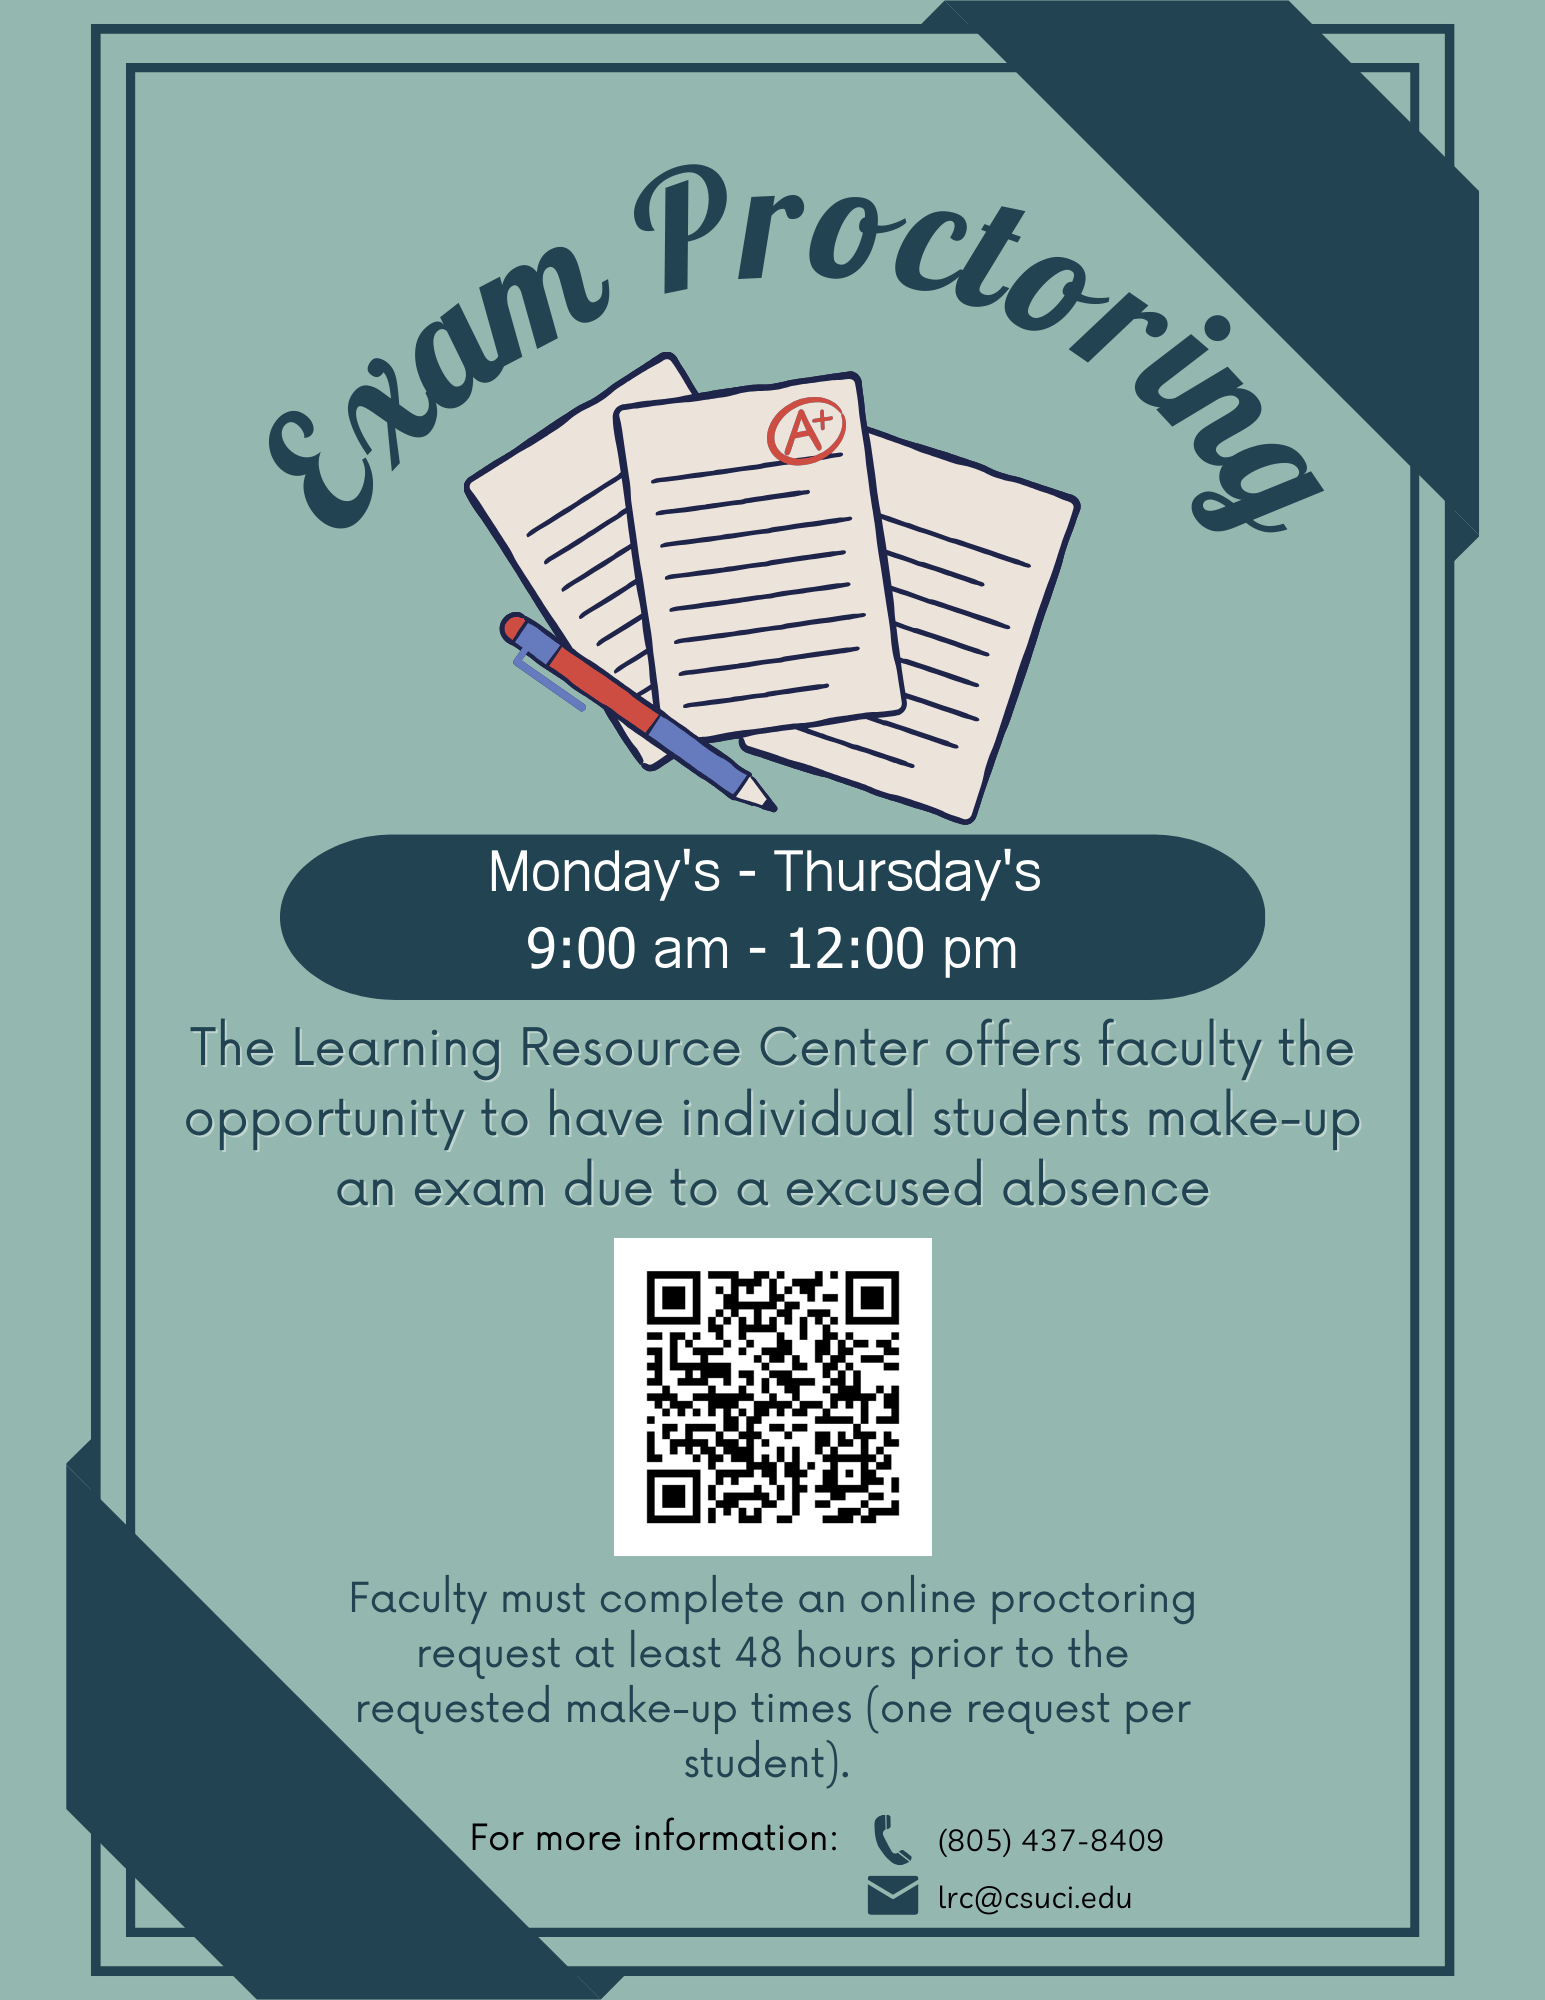 Exam protctoring flyer with hours monday through thursday, 9 am - 12 pm.